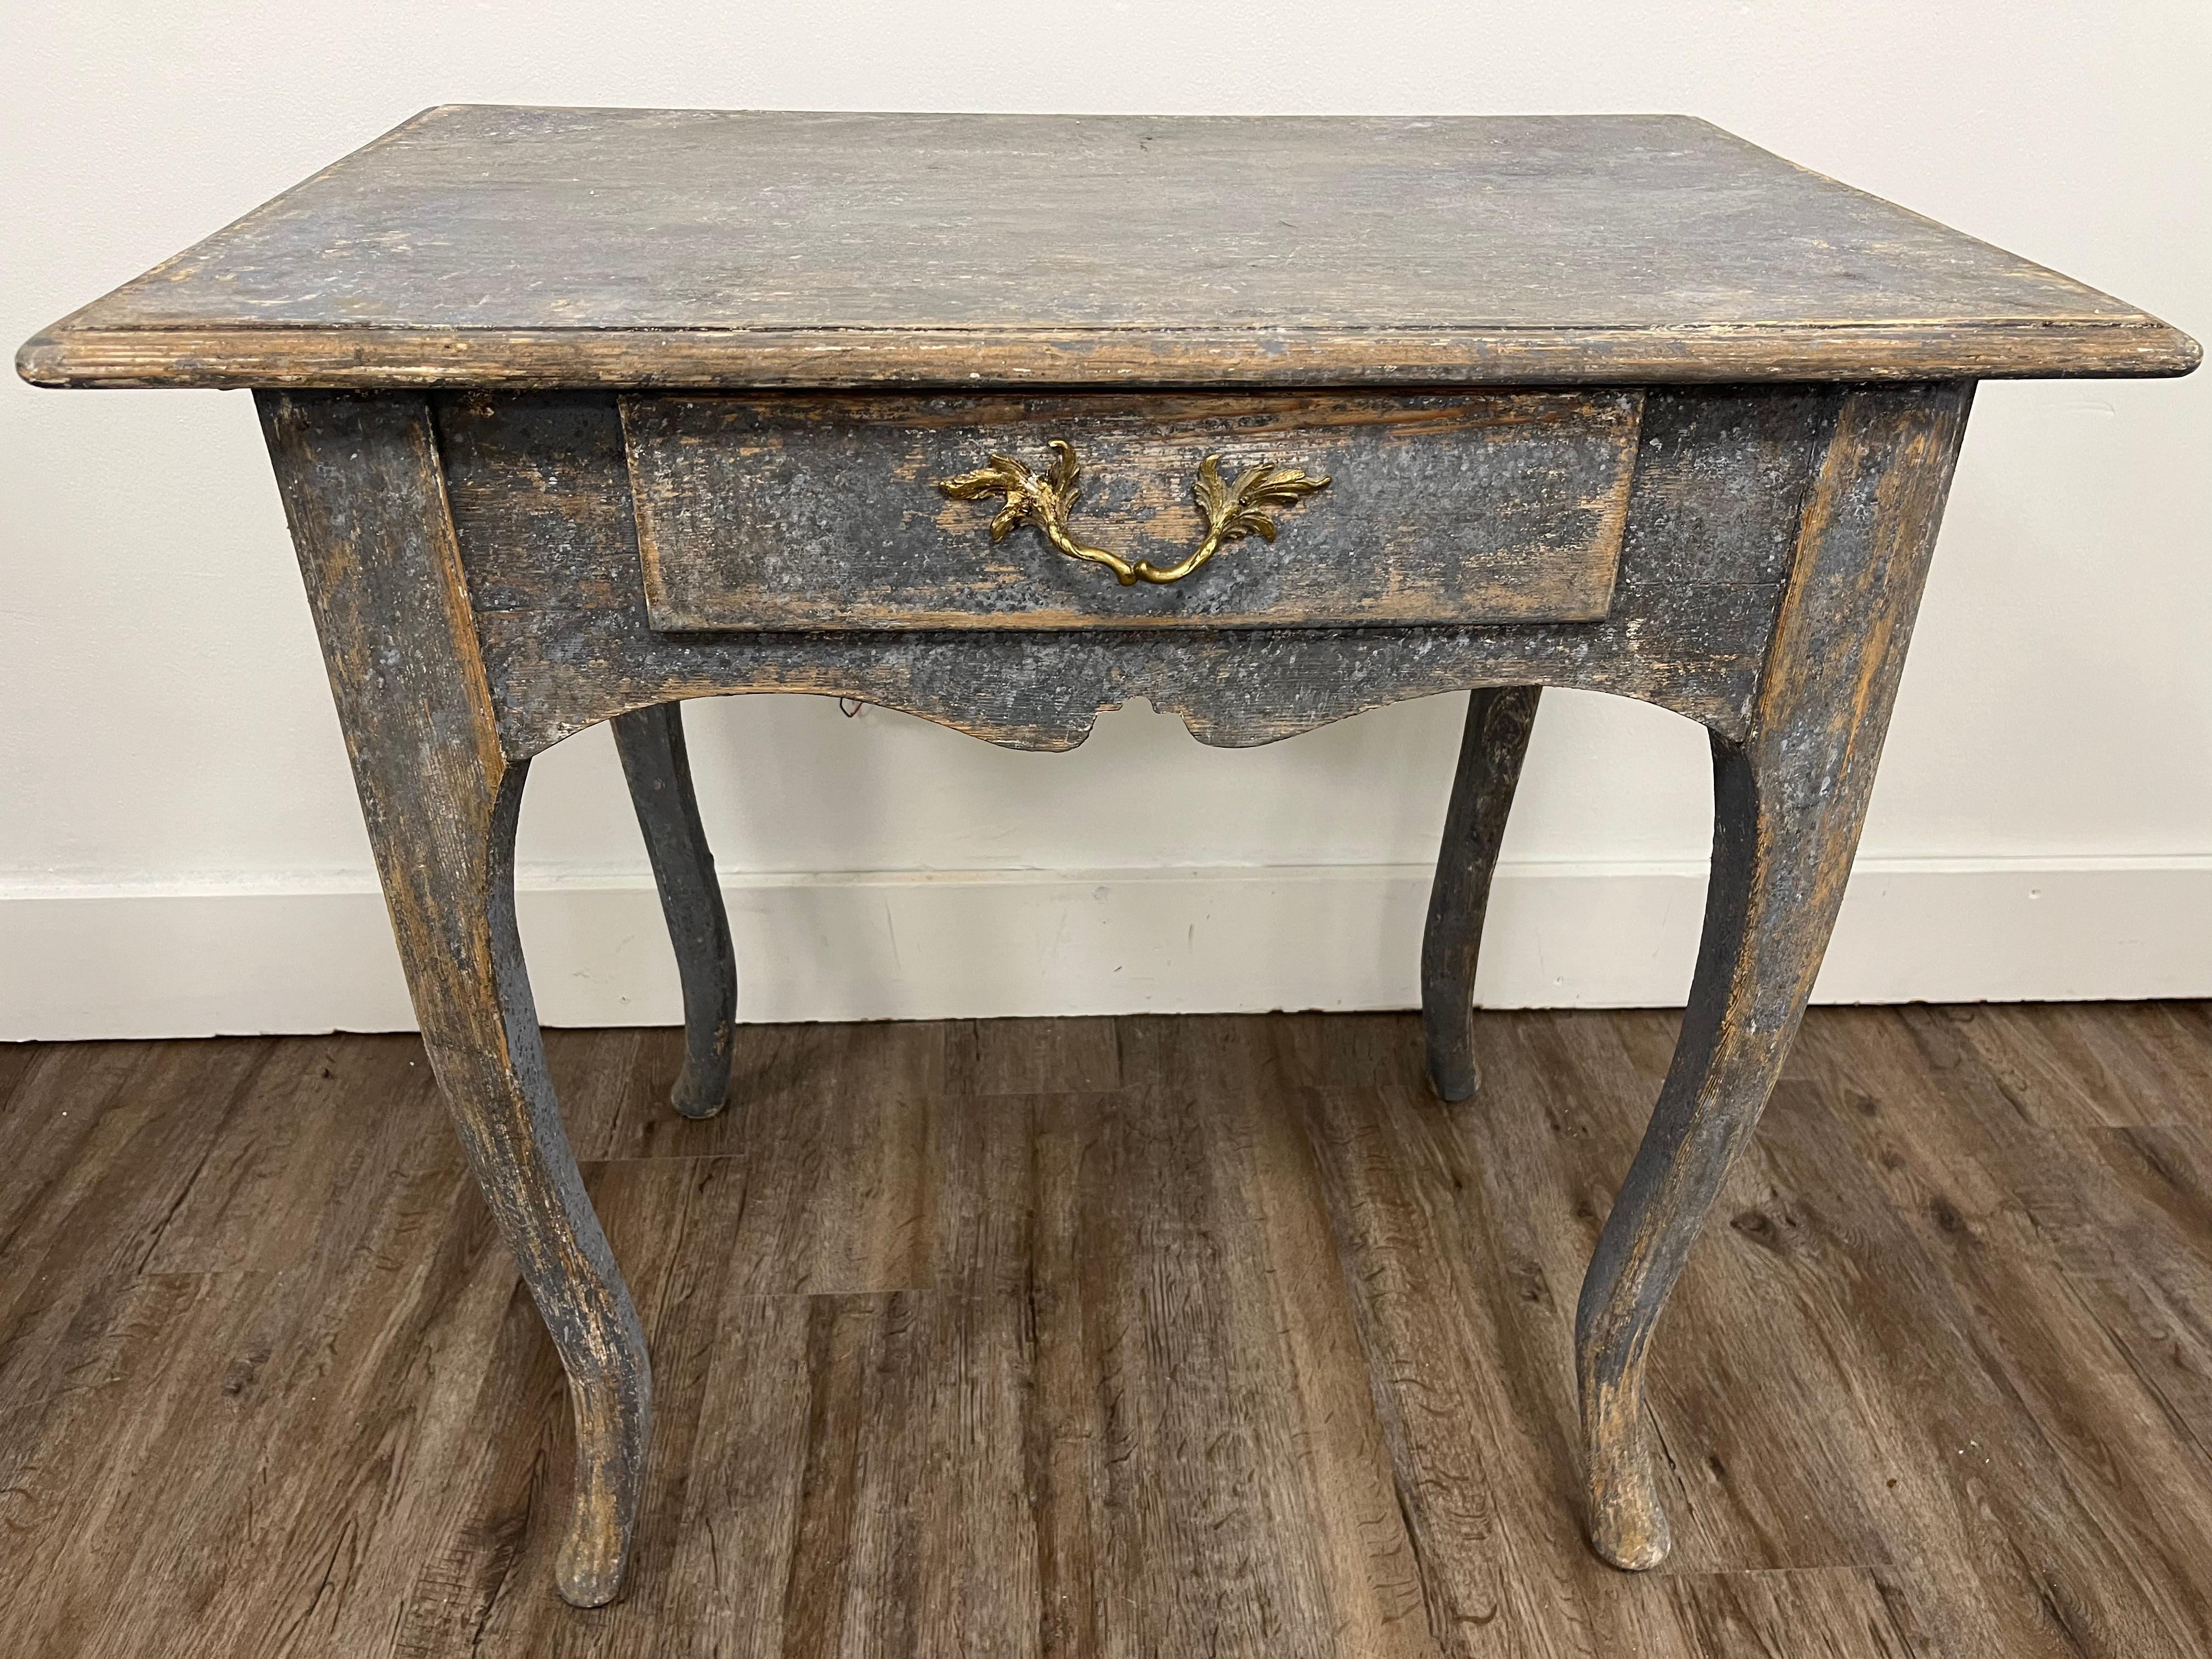 Hand-Painted 19th Century Swedish Rococo Style Console Table